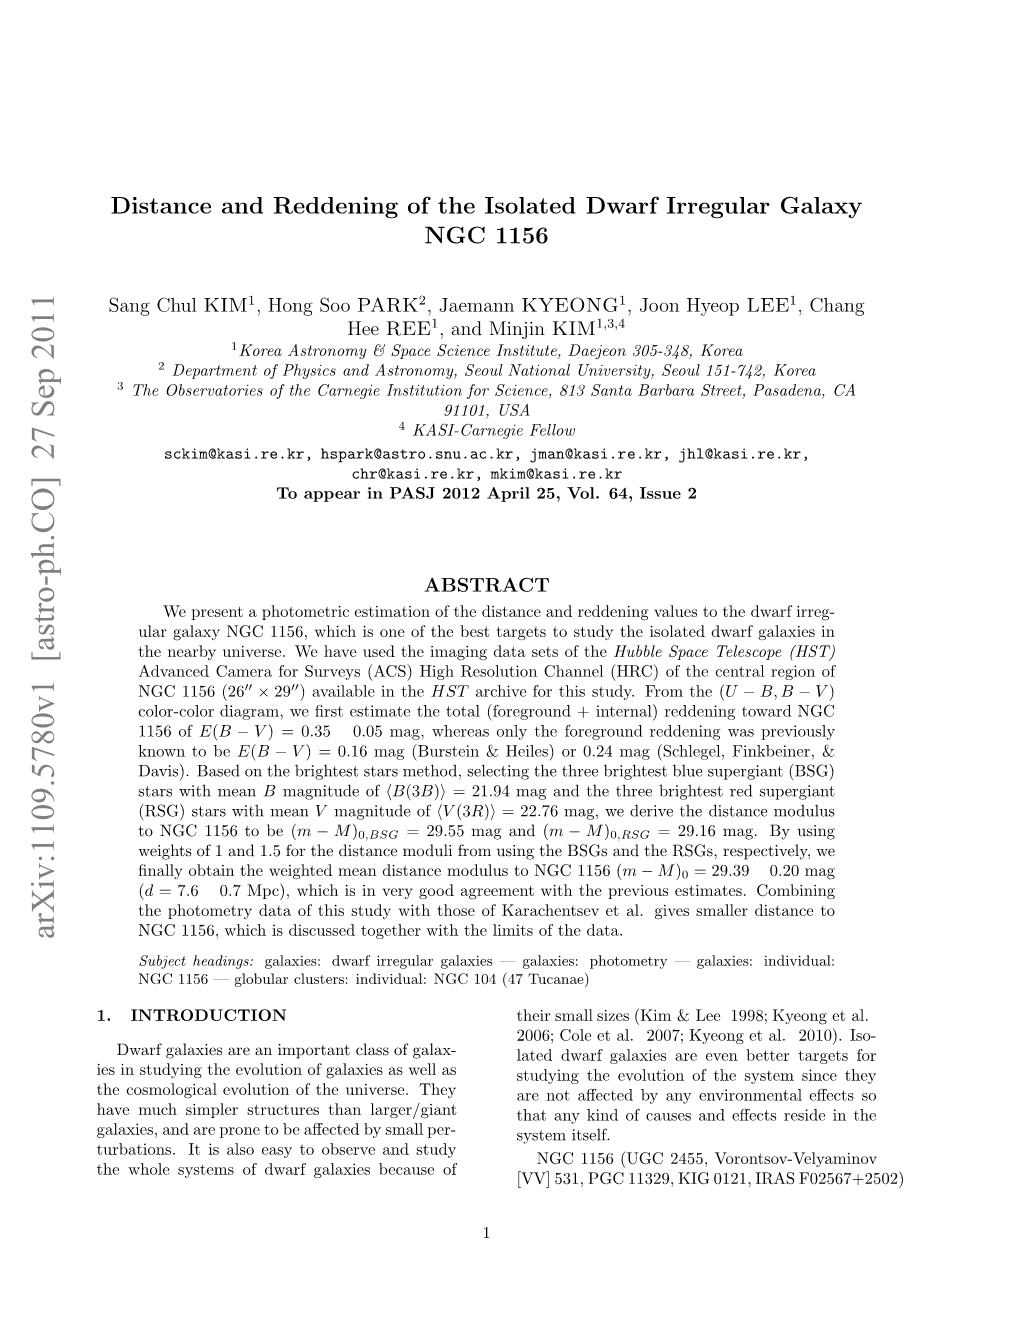 Distance and Reddening of the Isolated Dwarf Irregular Galaxy